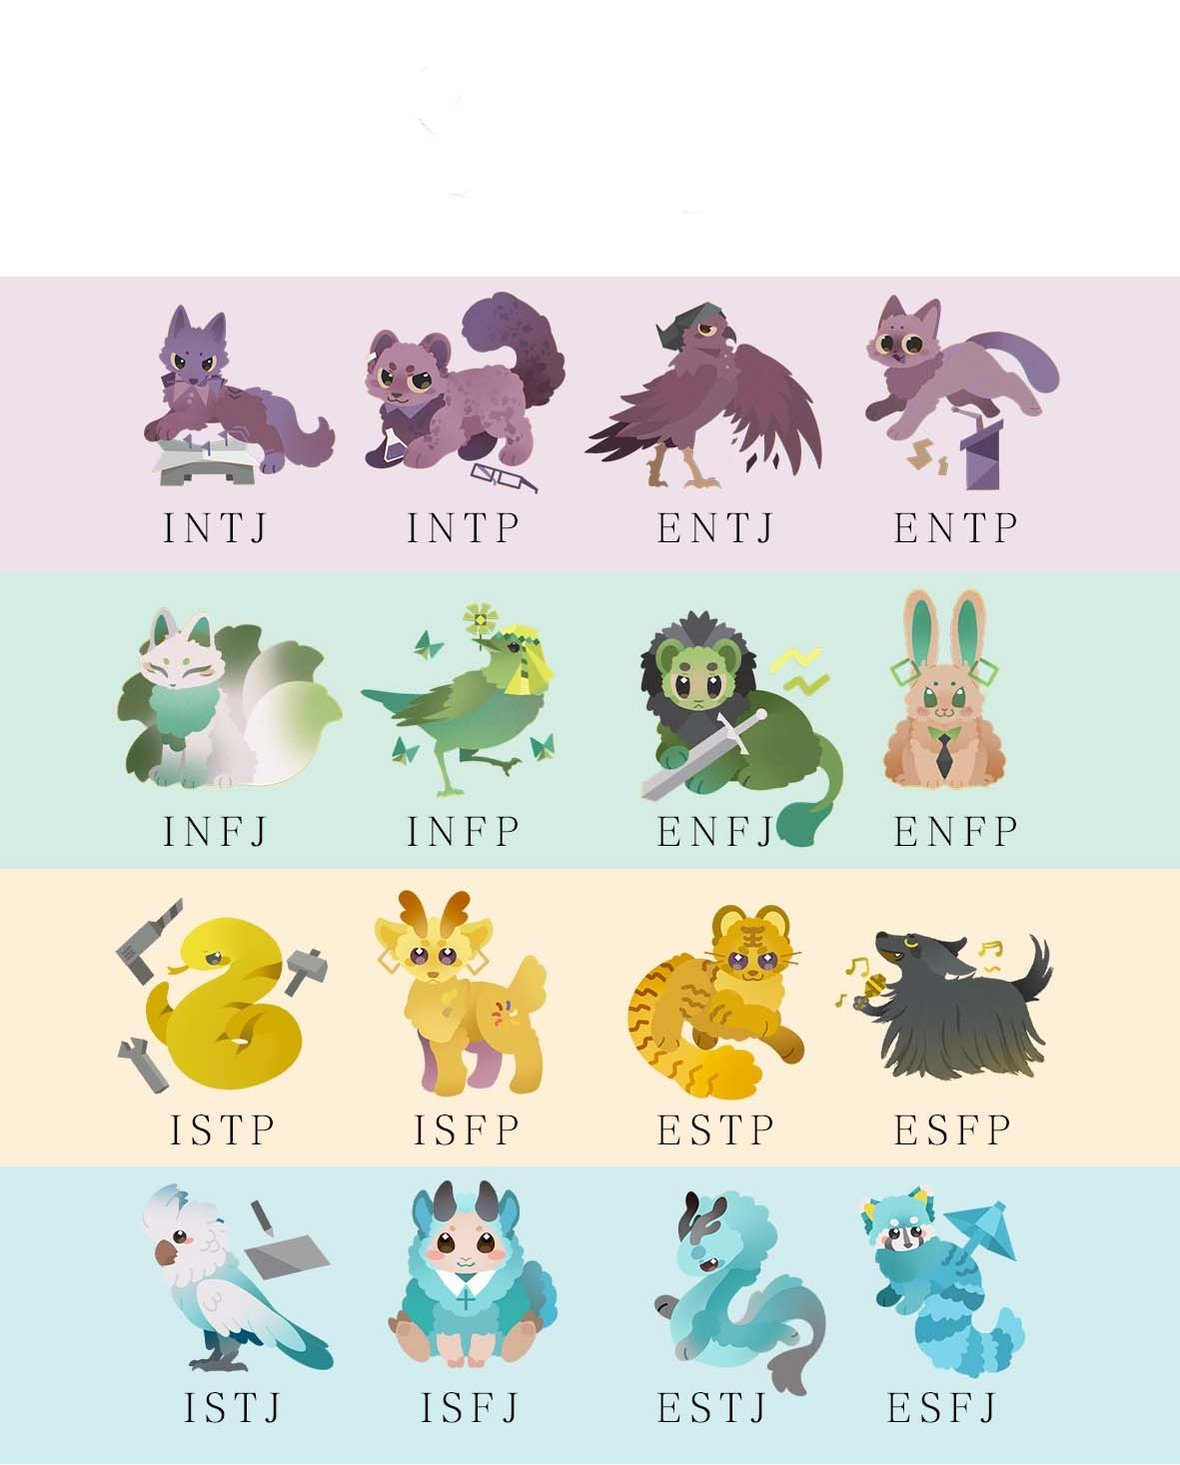 Your favorite animal and it's MBTI on personality database : r/mbti